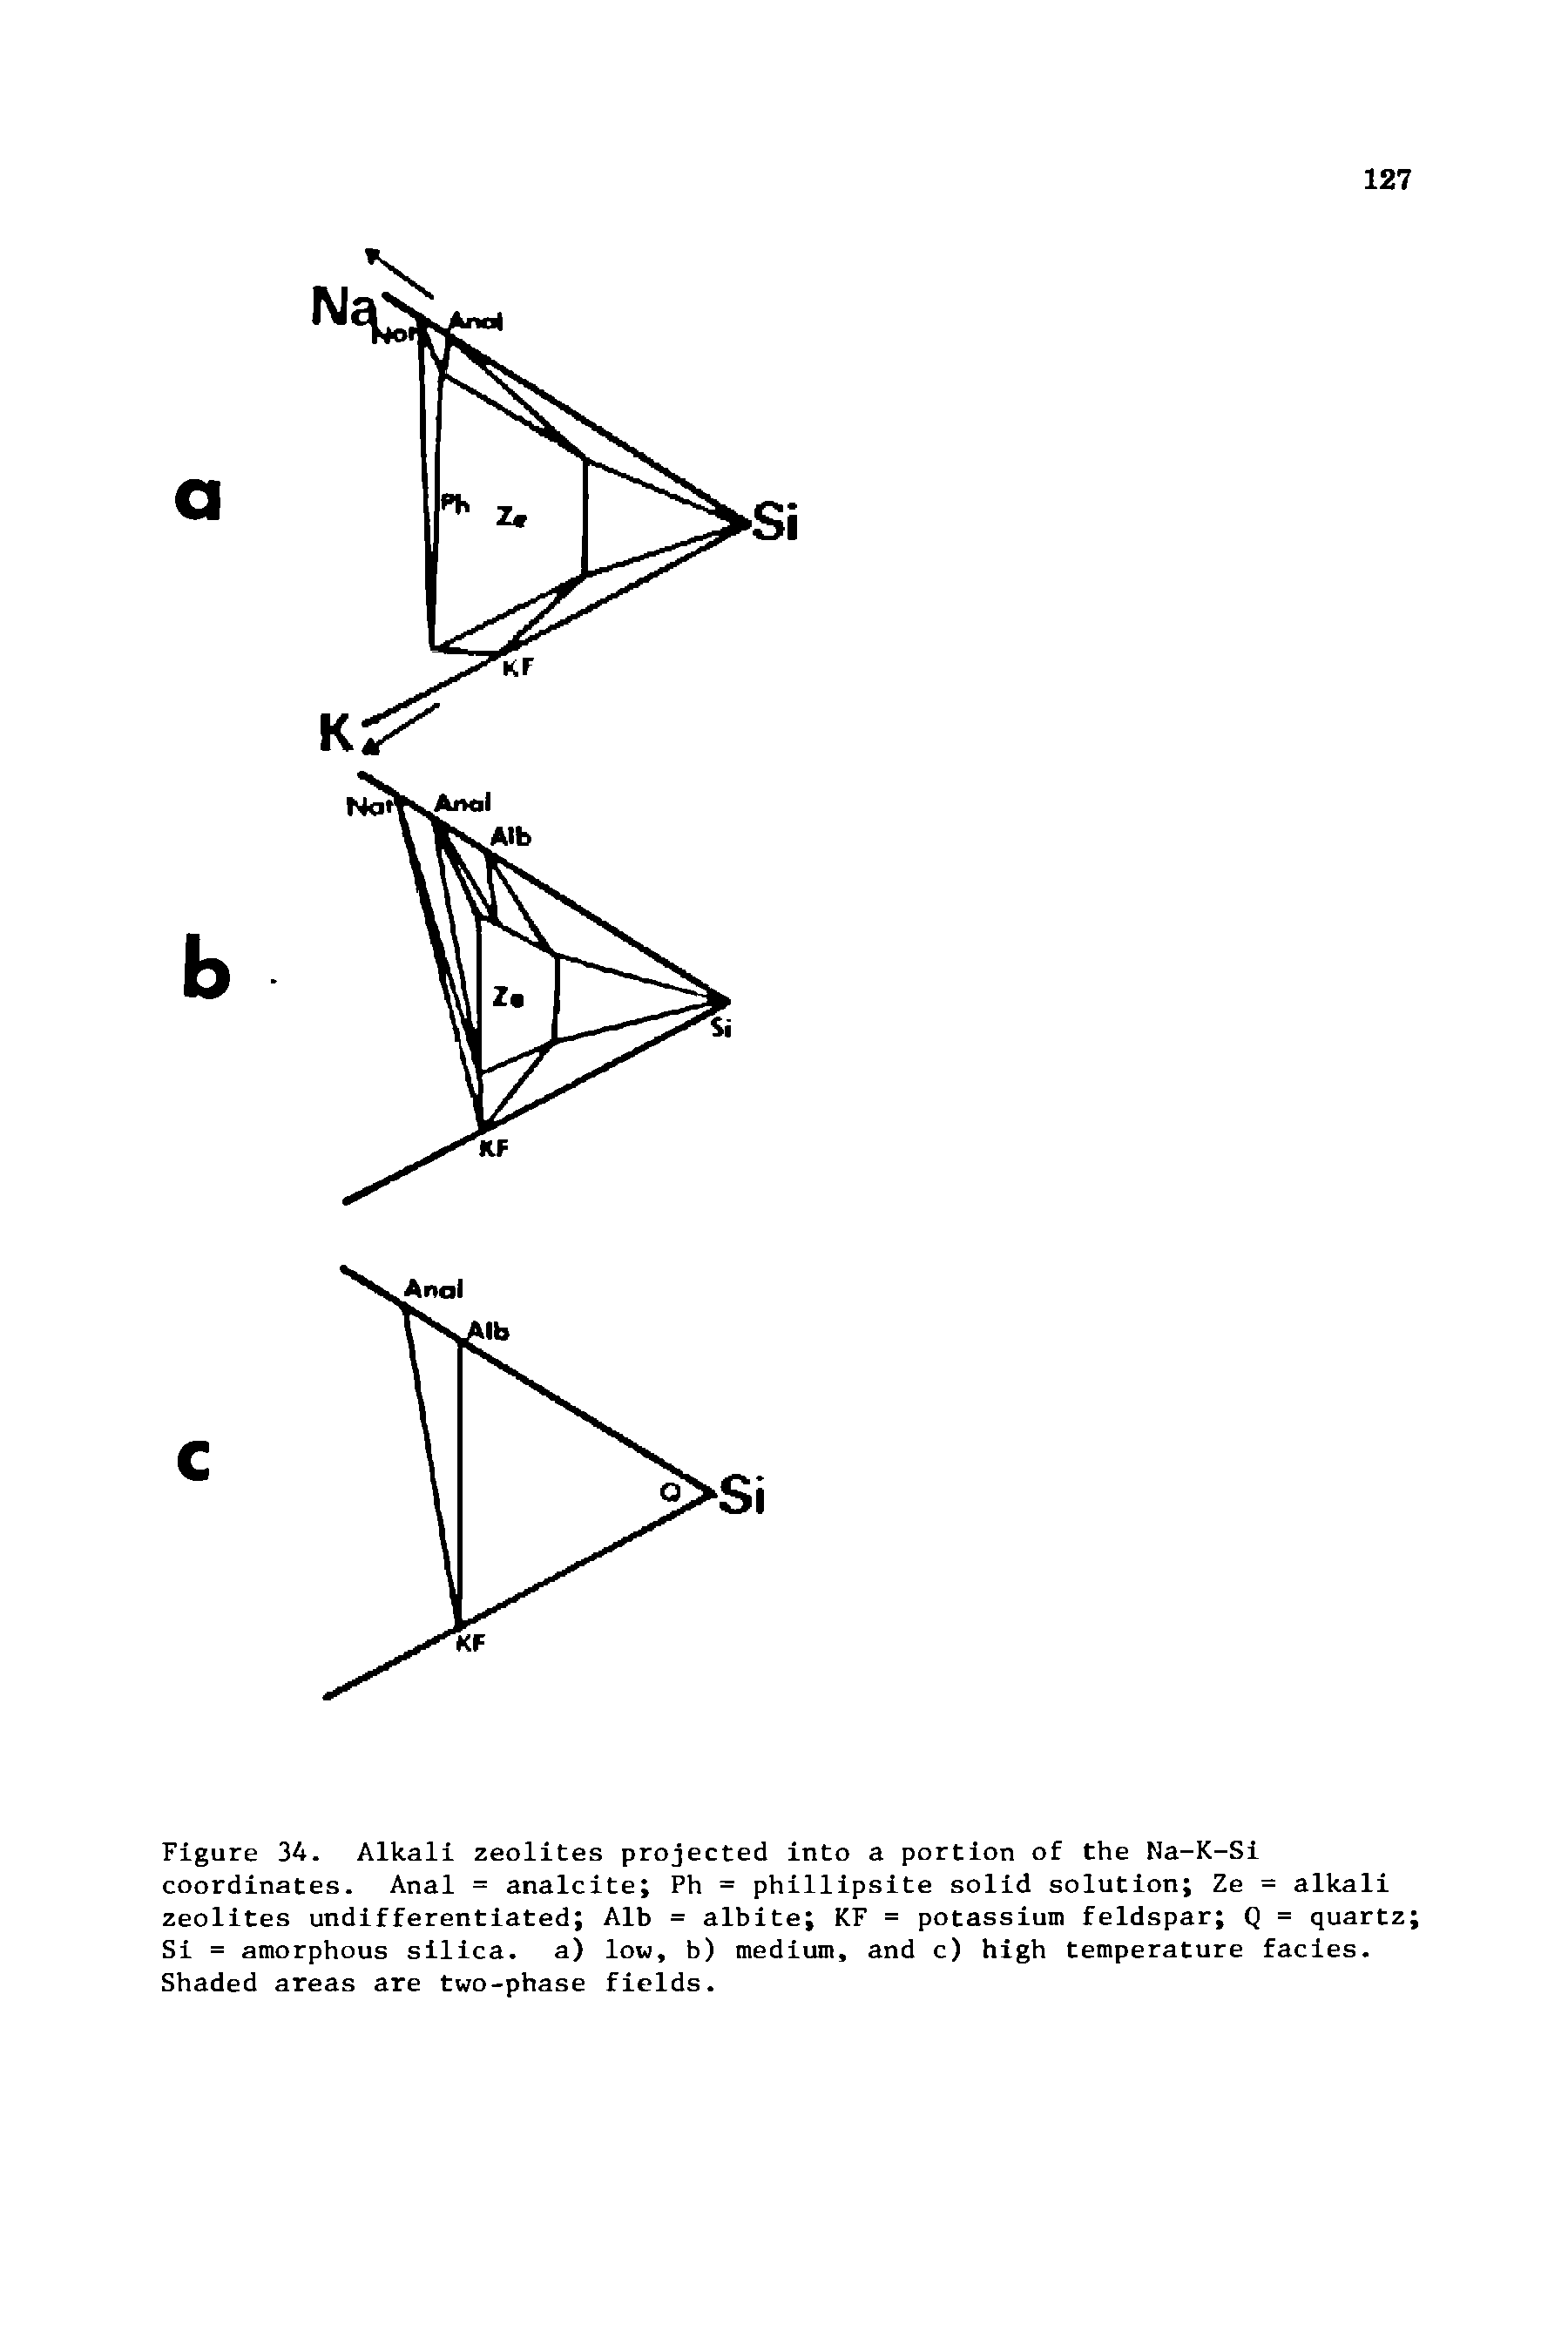 Figure 34. Alkali zeolites projected into a portion of the Na-K-Si coordinates. Anal = analcite Ph = phillipsite solid solution Ze = alkali zeolites undifferentiated Alb = albite KF = potassium feldspar Q = quartz Si = amorphous silica, a) low, b) medium, and c) high temperature facies. Shaded areas are two-phase fields.